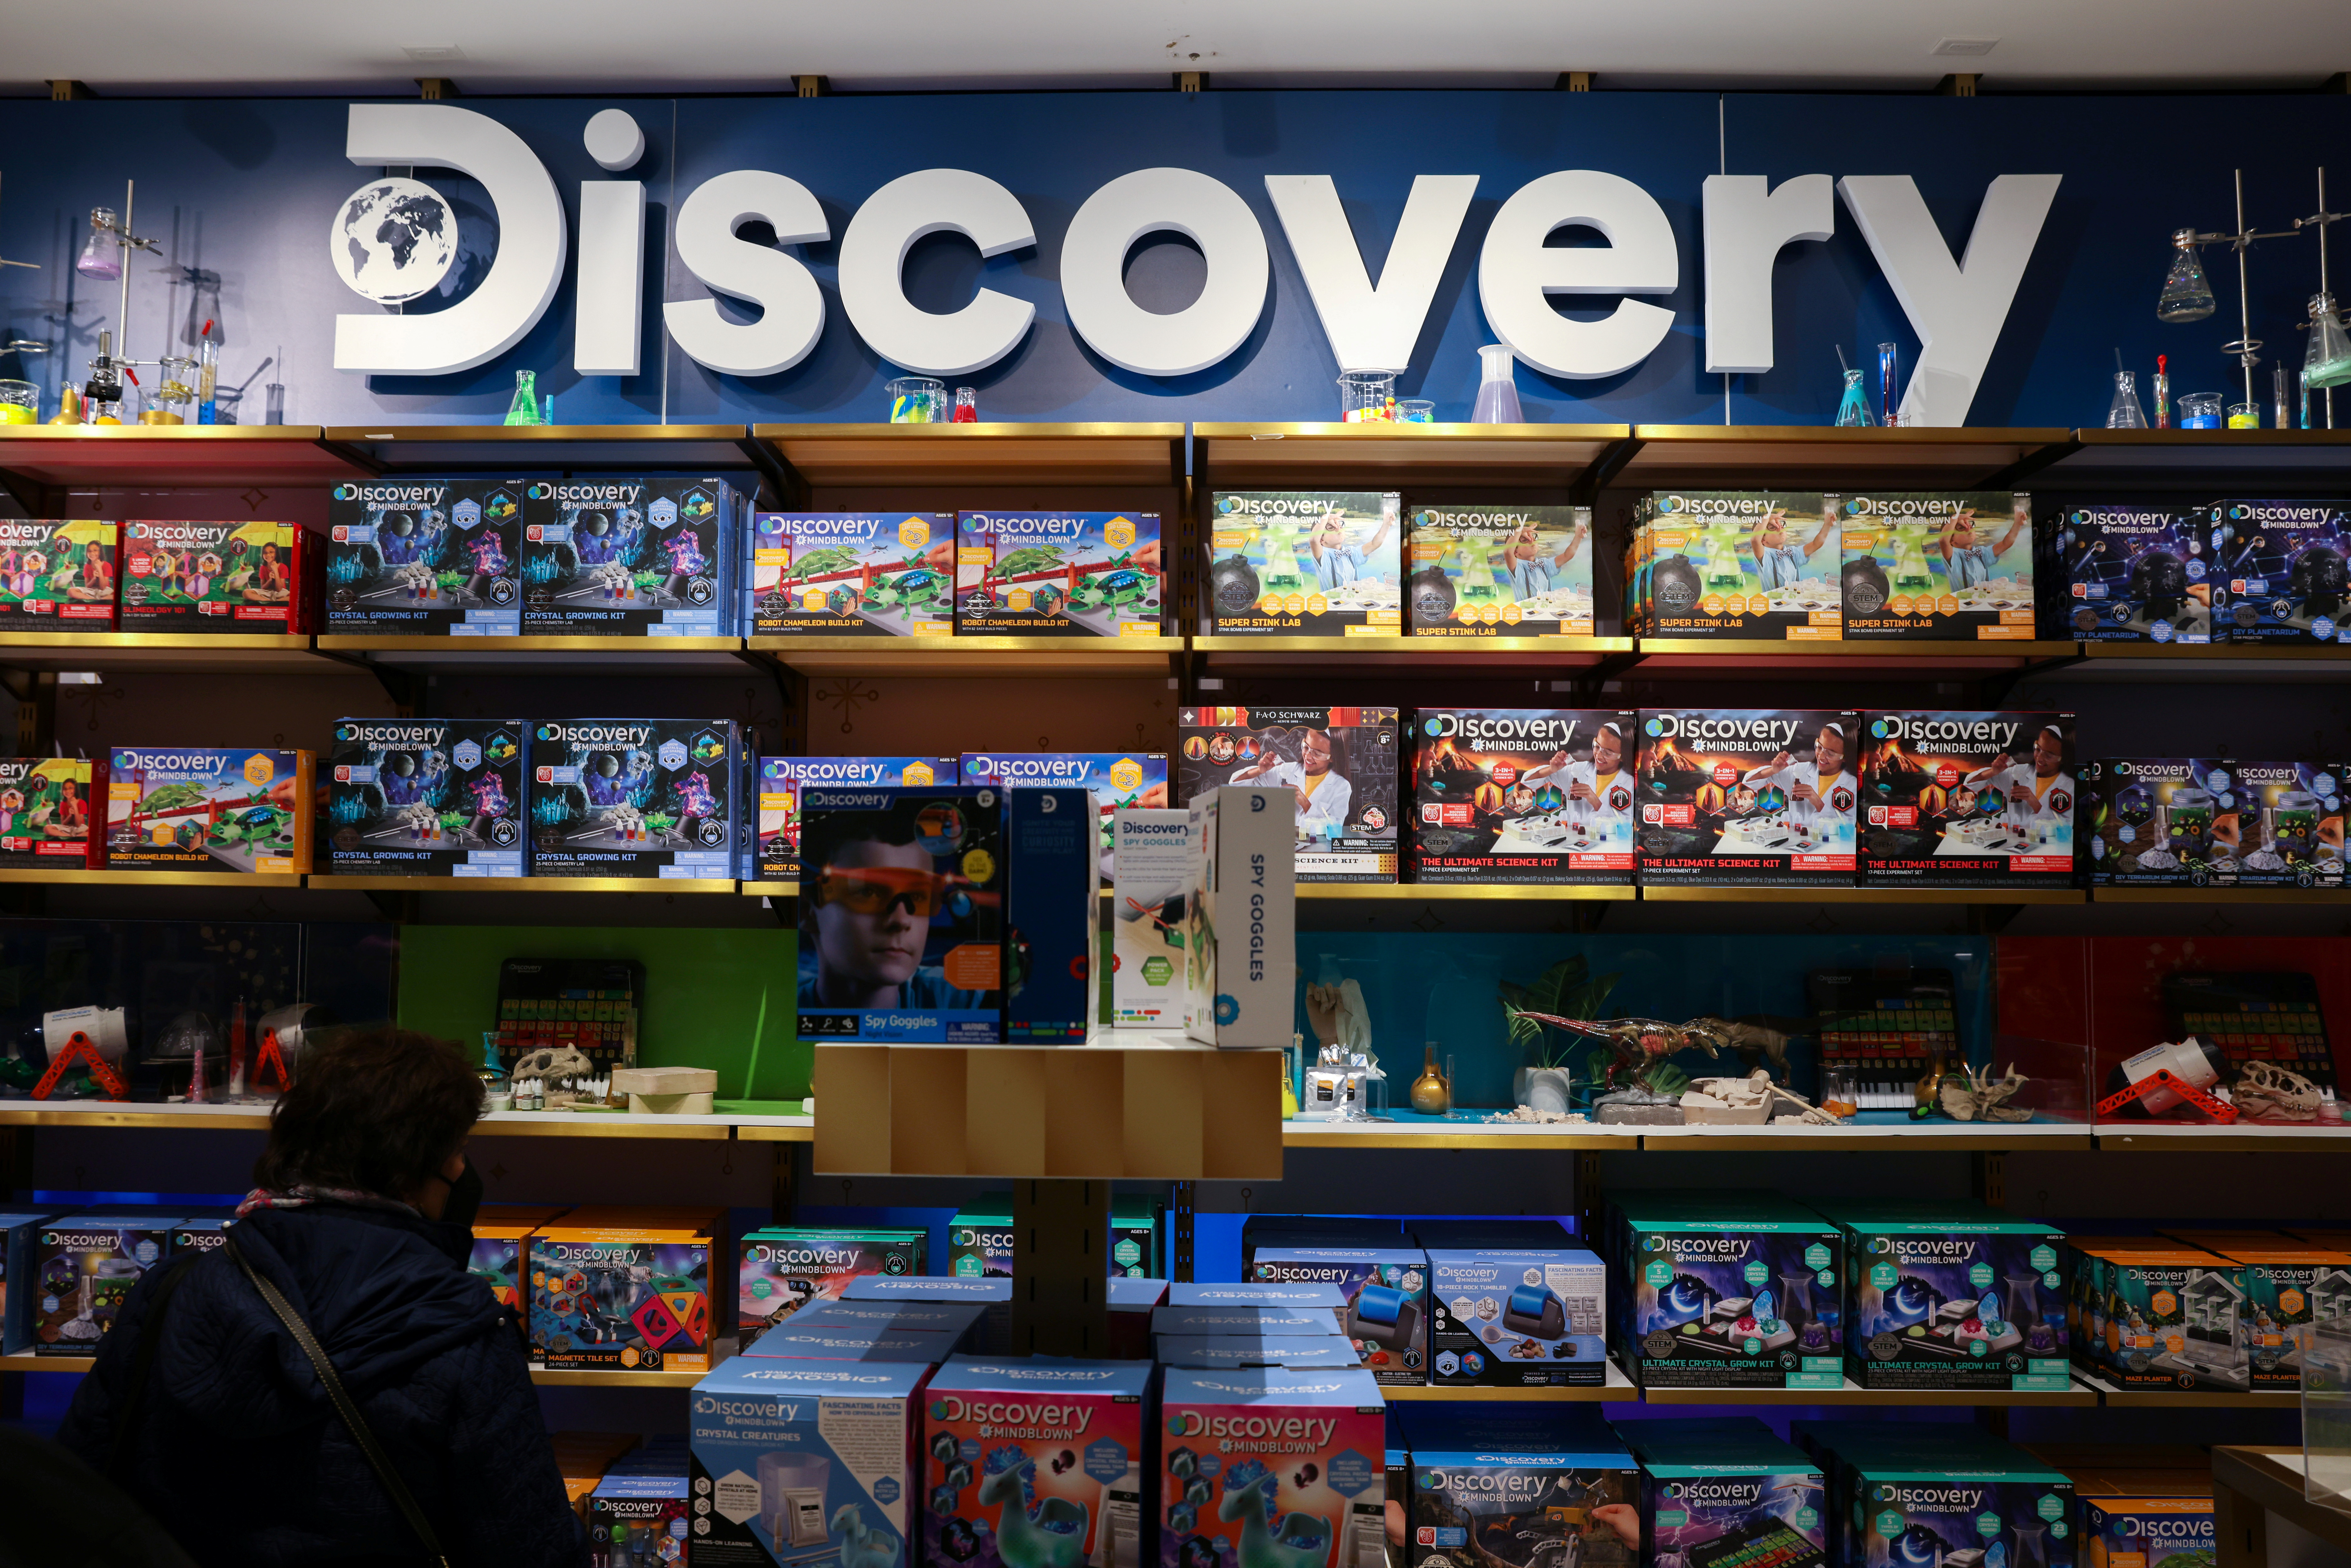 The Discovery, Inc. logo is seen on a display in the FAO Schwarz toy store in Manhattan, New York City